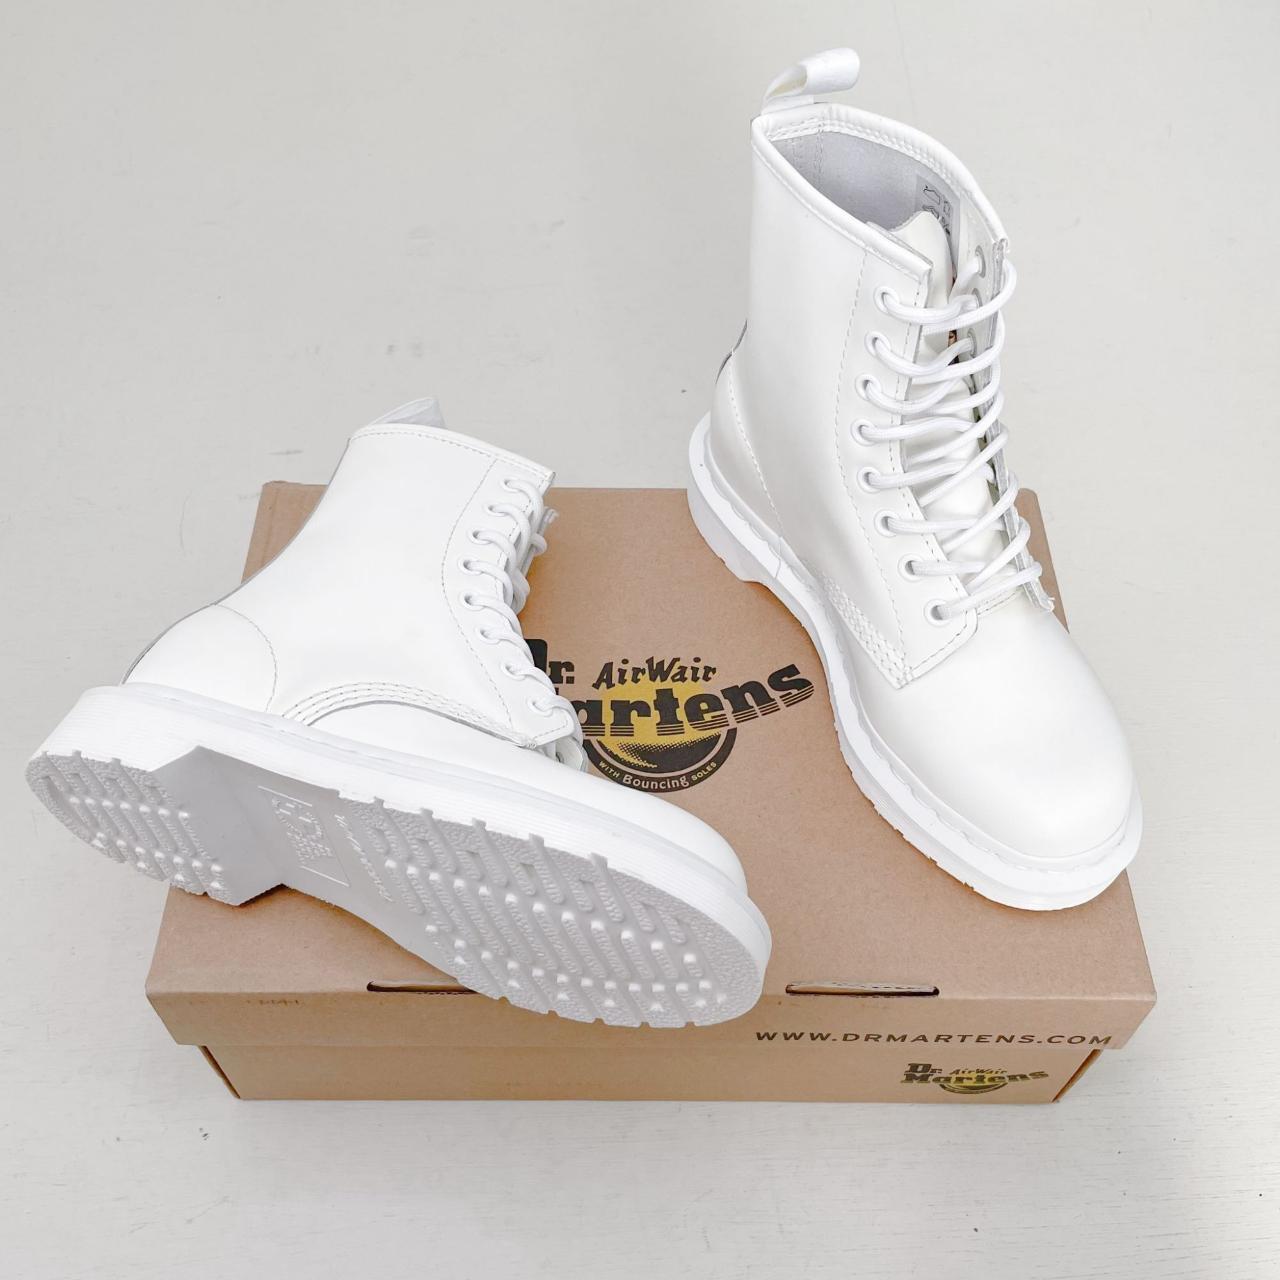 1460 Mono Smooth Leather Lace Up Boots in White